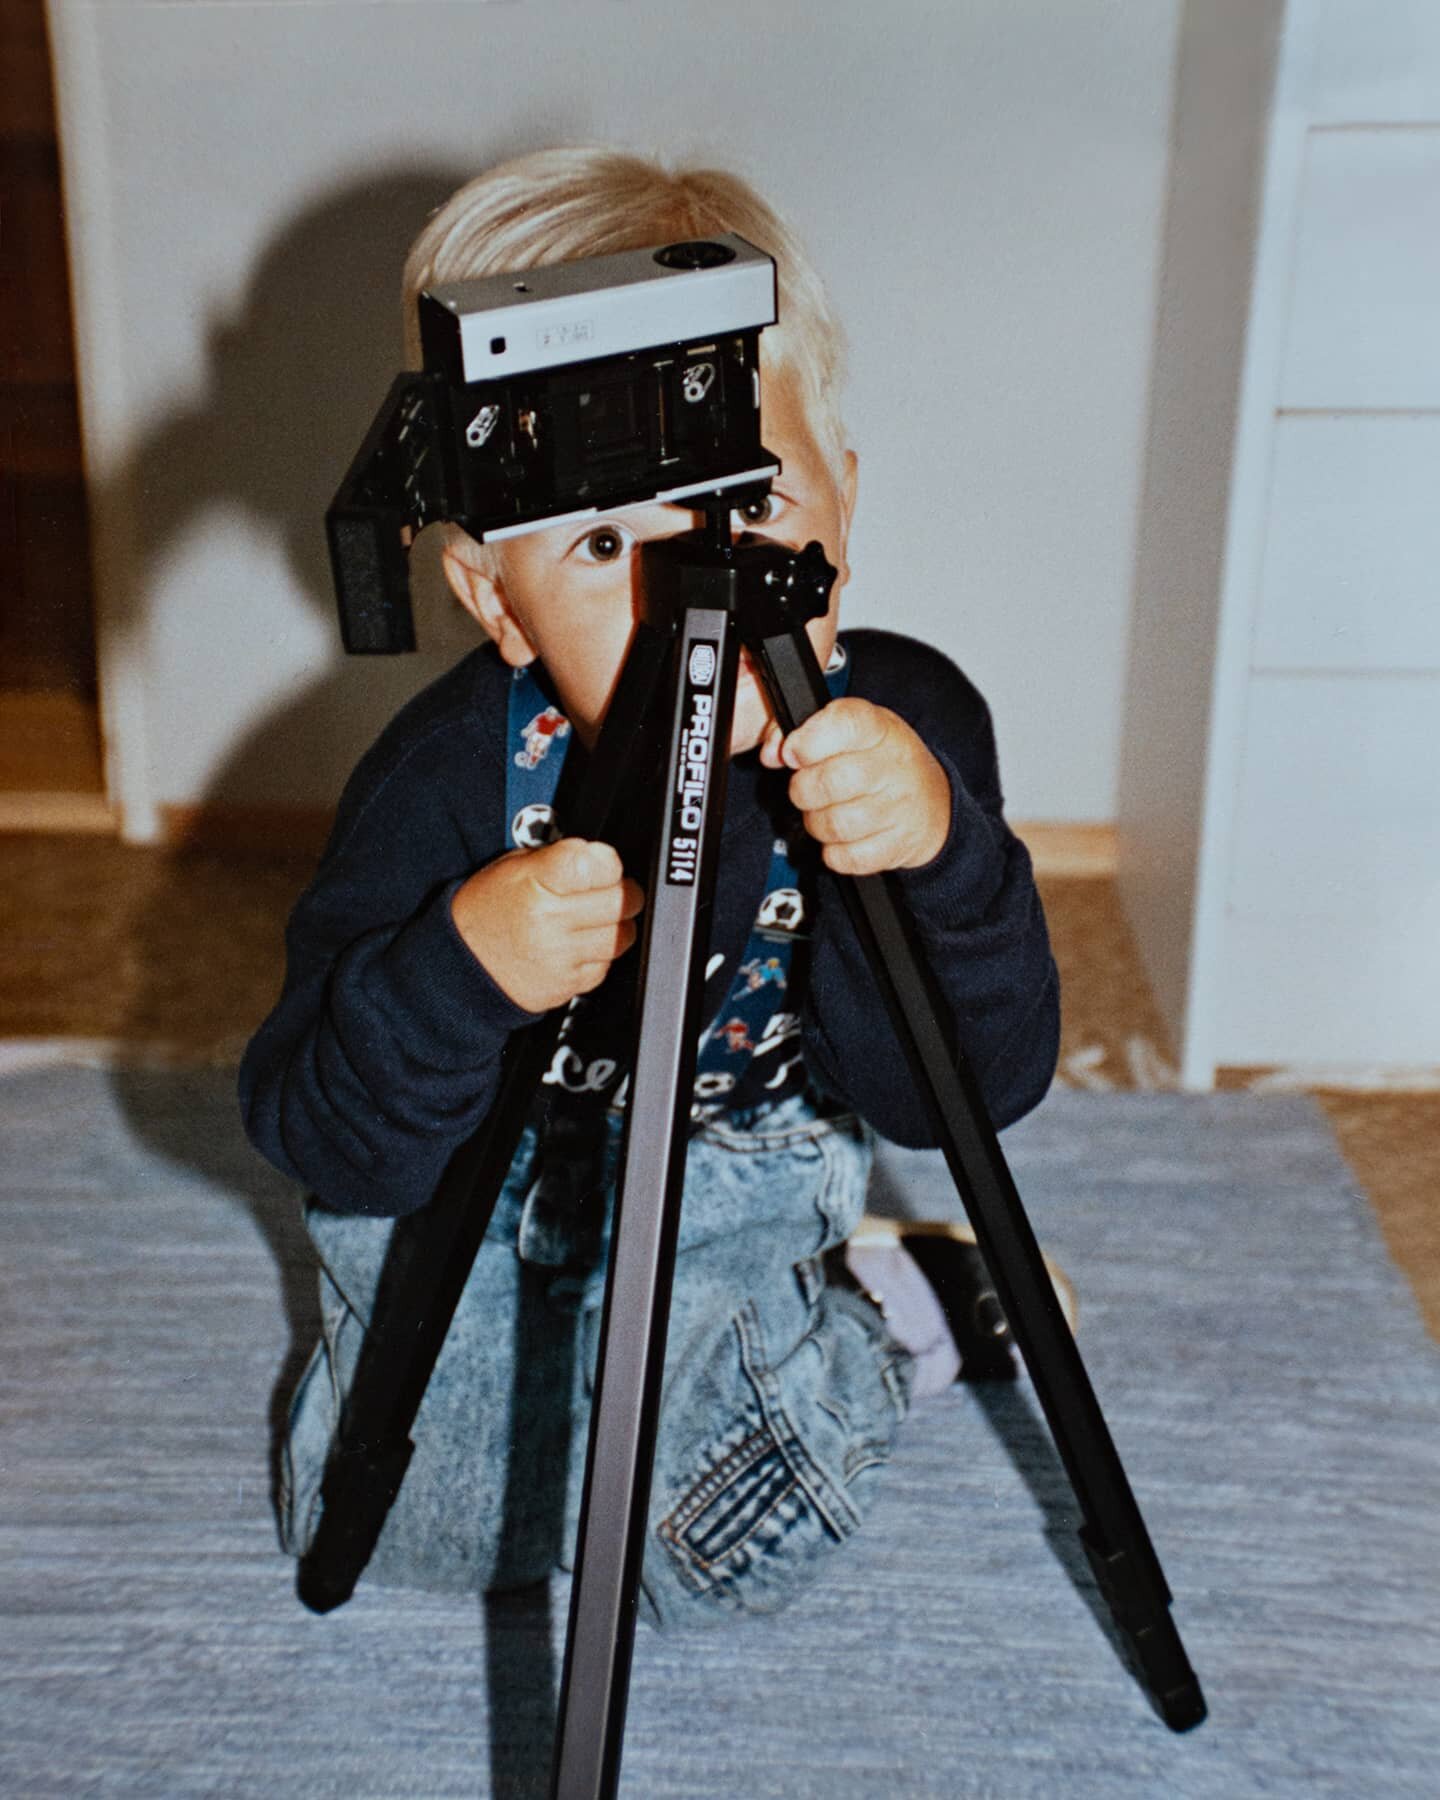 Today is my birthday! 🥳🎉
This photo was taken 33 years ago when I was 3. Still rocking with cameras allmost everyday. 📷📽